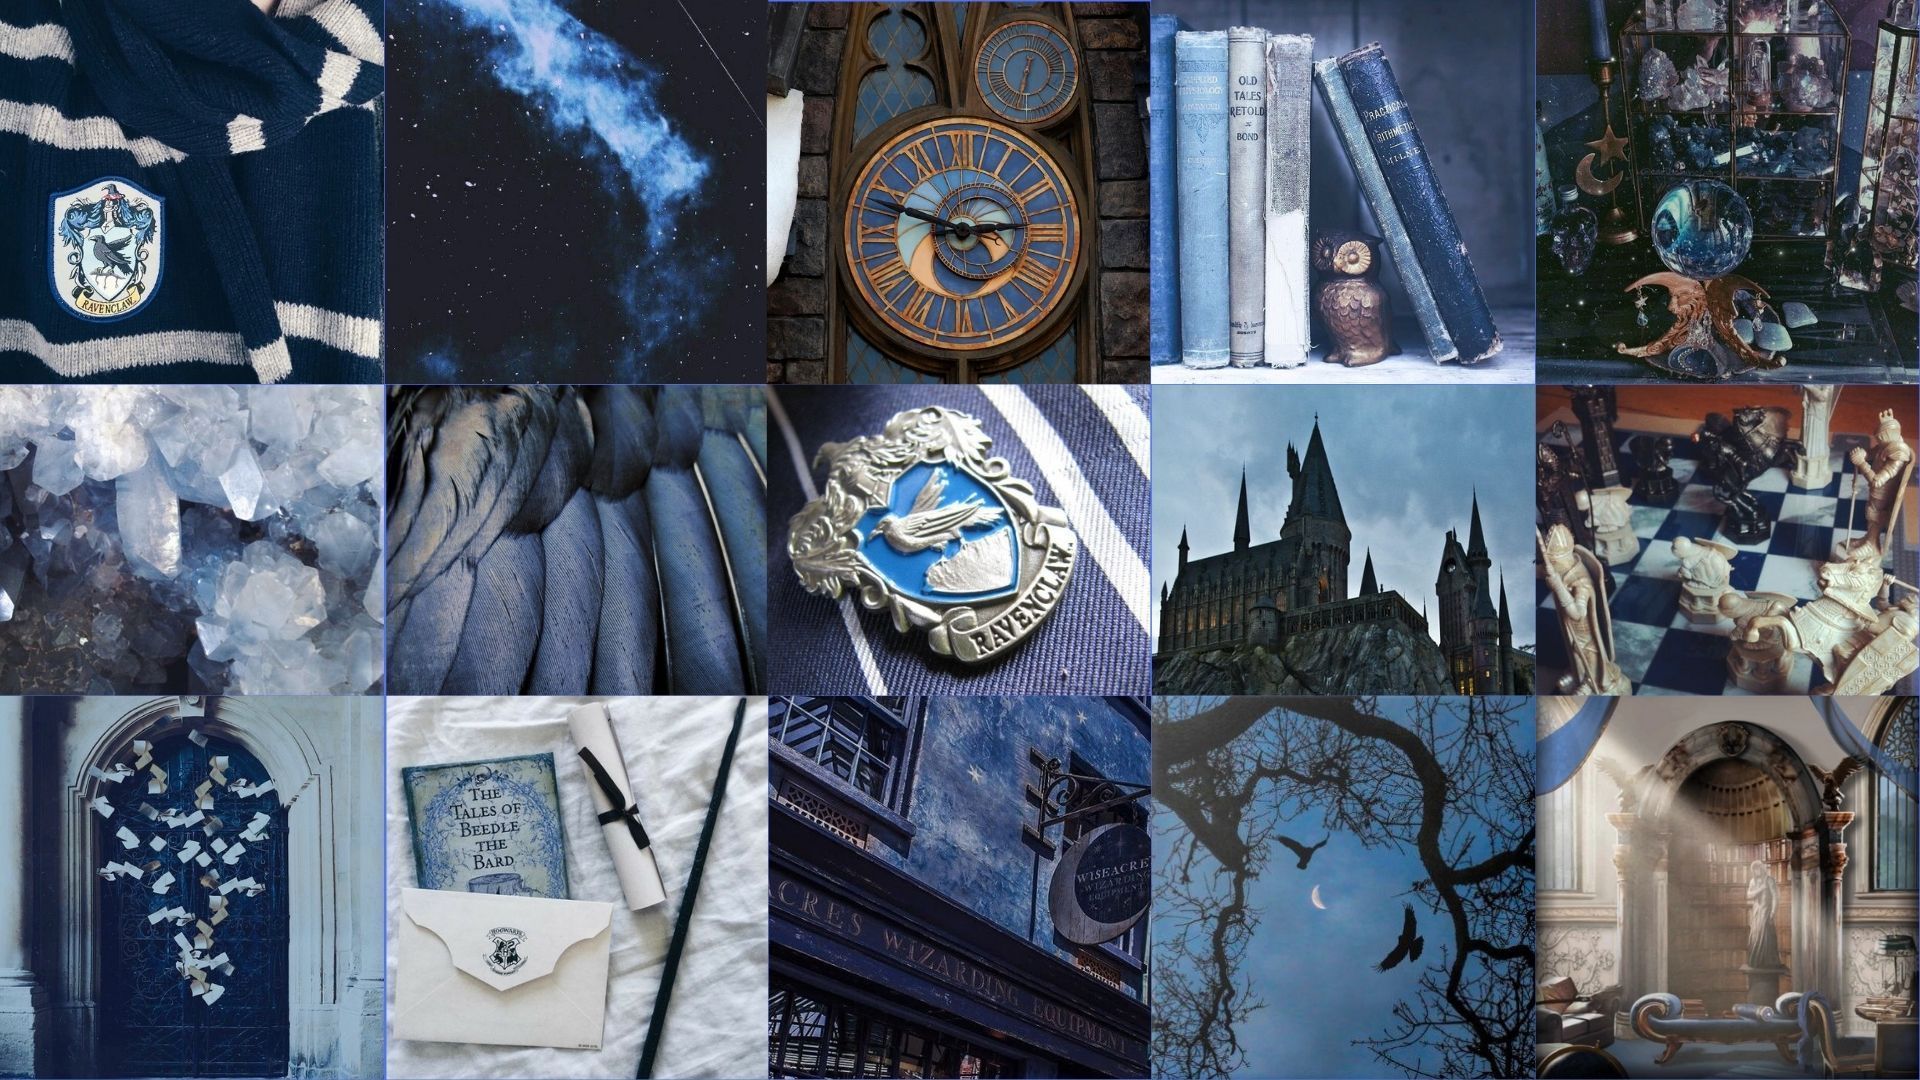 Ravenclaw Aesthetic Wallpaper. Ravenclaw aesthetic, Wallpaper, Homescreen wallpaper